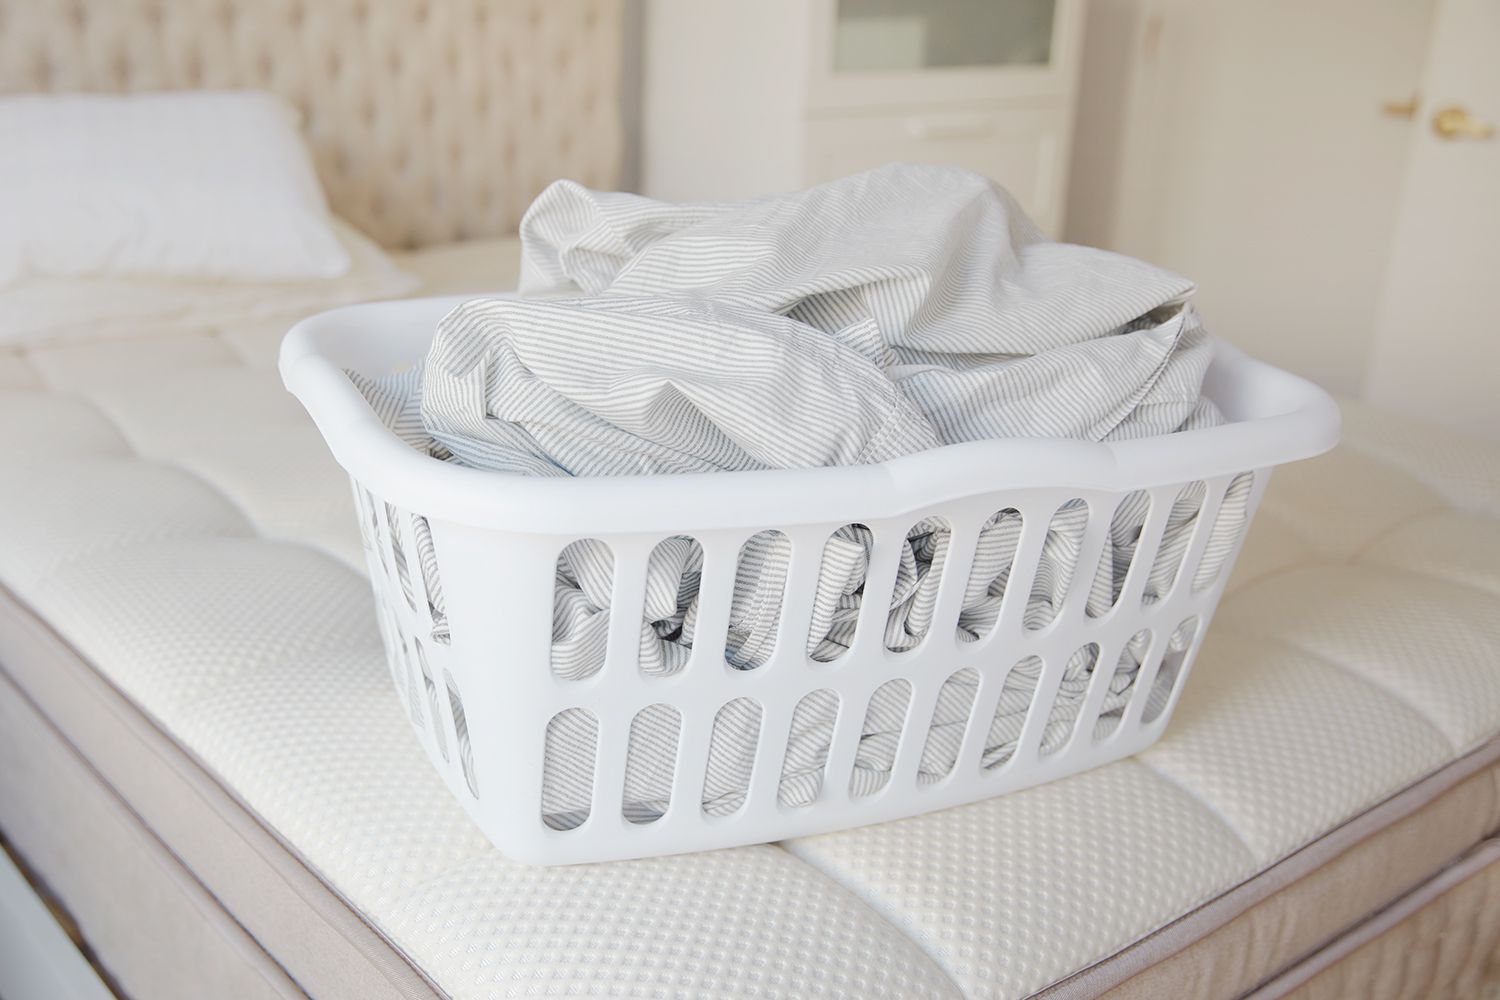 How to Disinfect Laundry After a Viral or Bacterial Infection